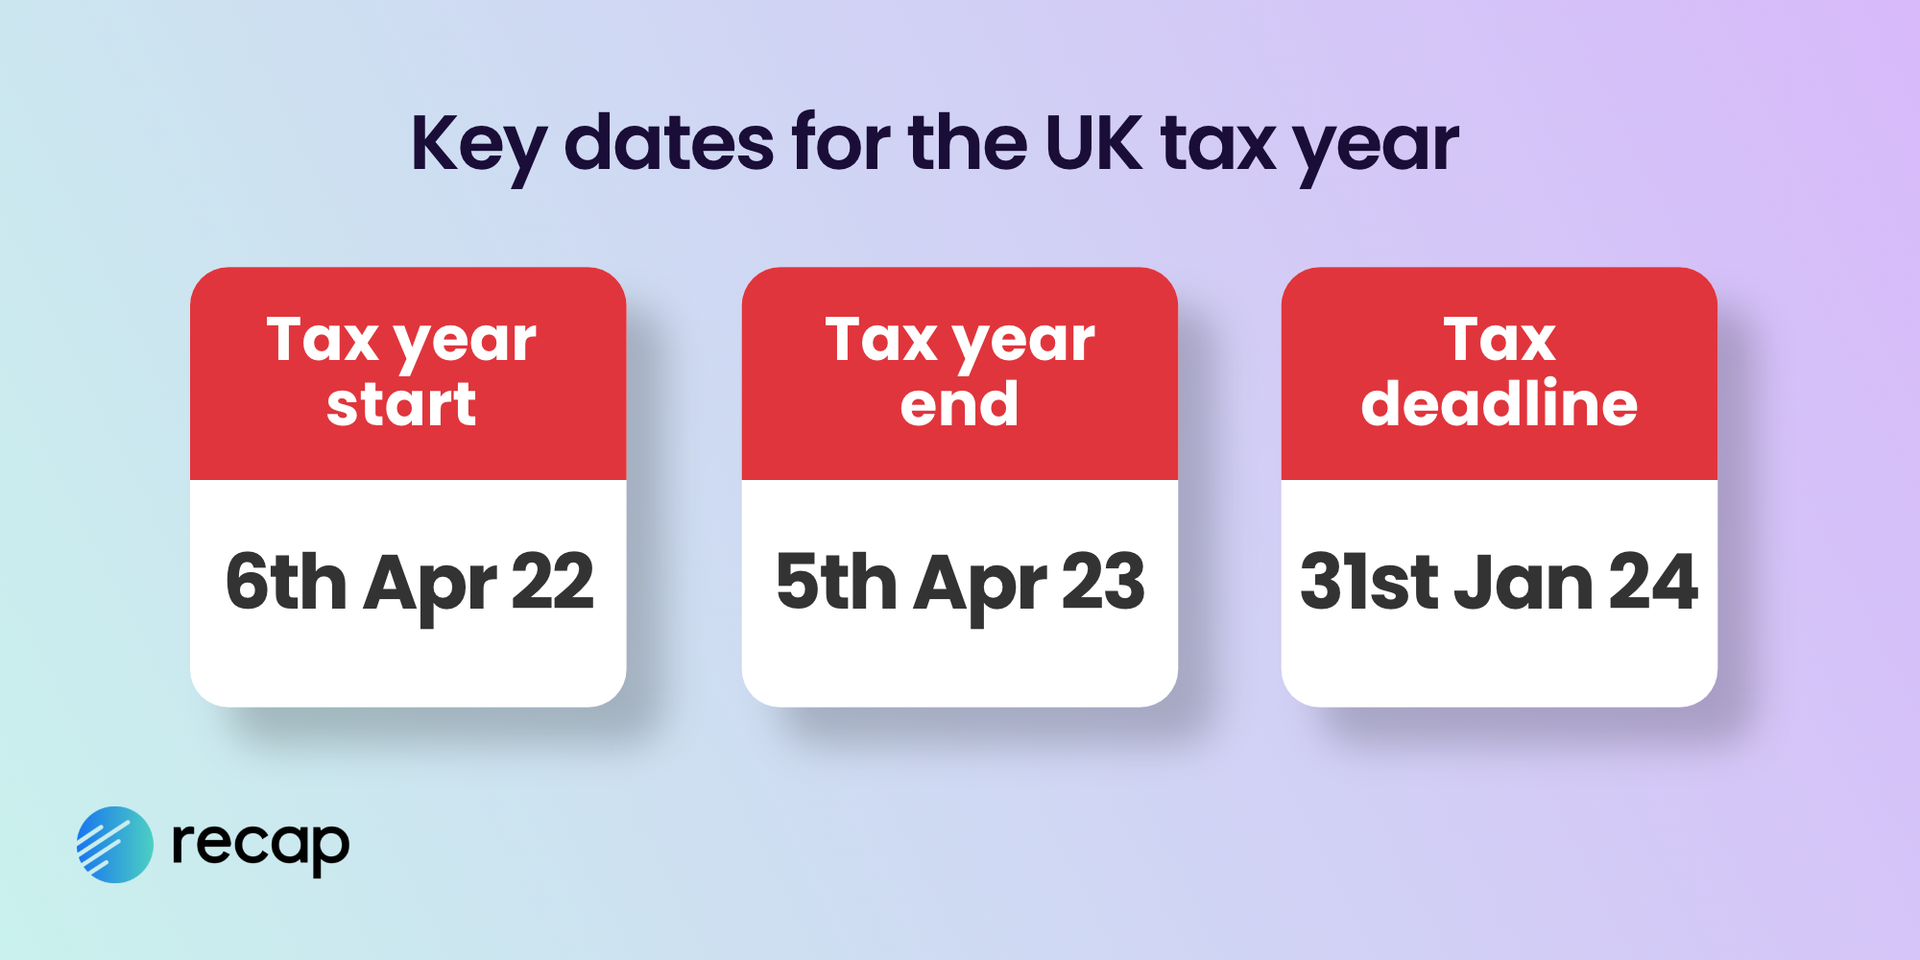 Key dates for the UK tax year